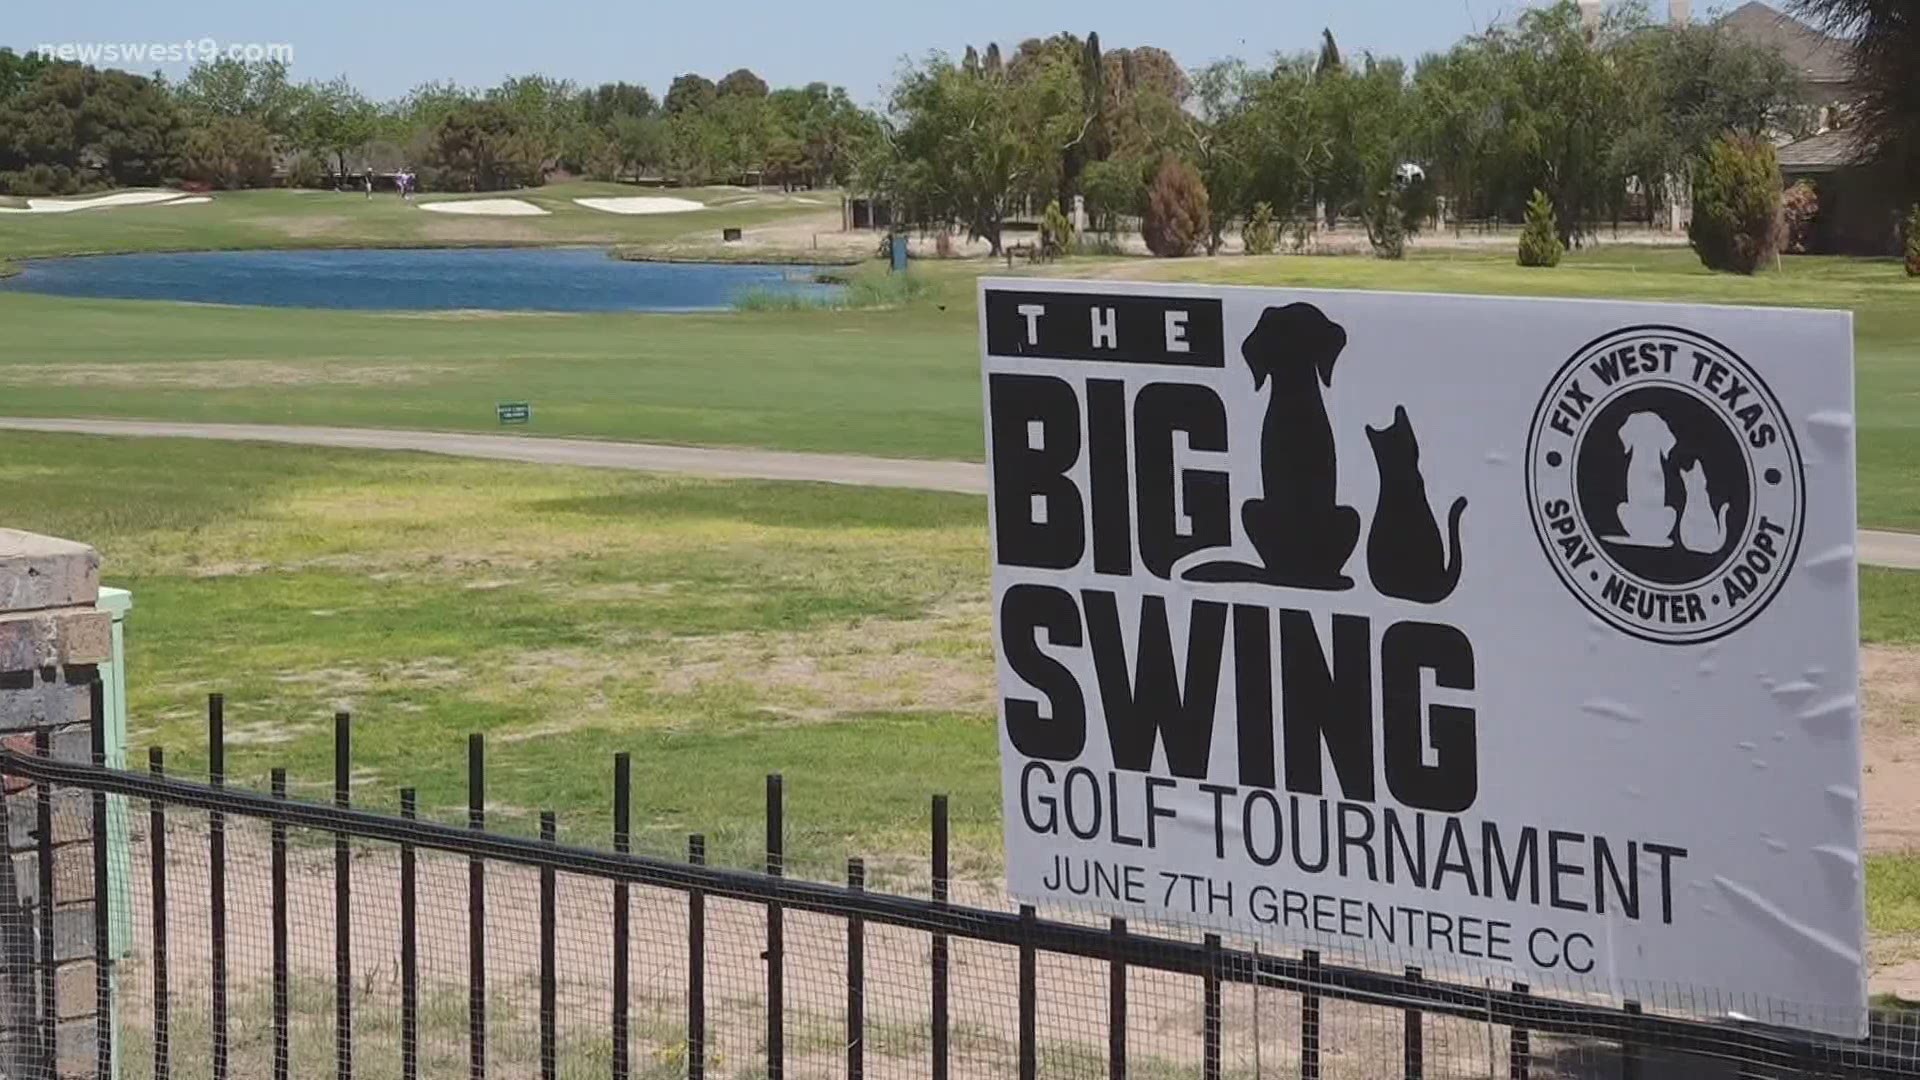 The event, titled "The Big Swing," will happen June 7 at Green Tree Country Club.